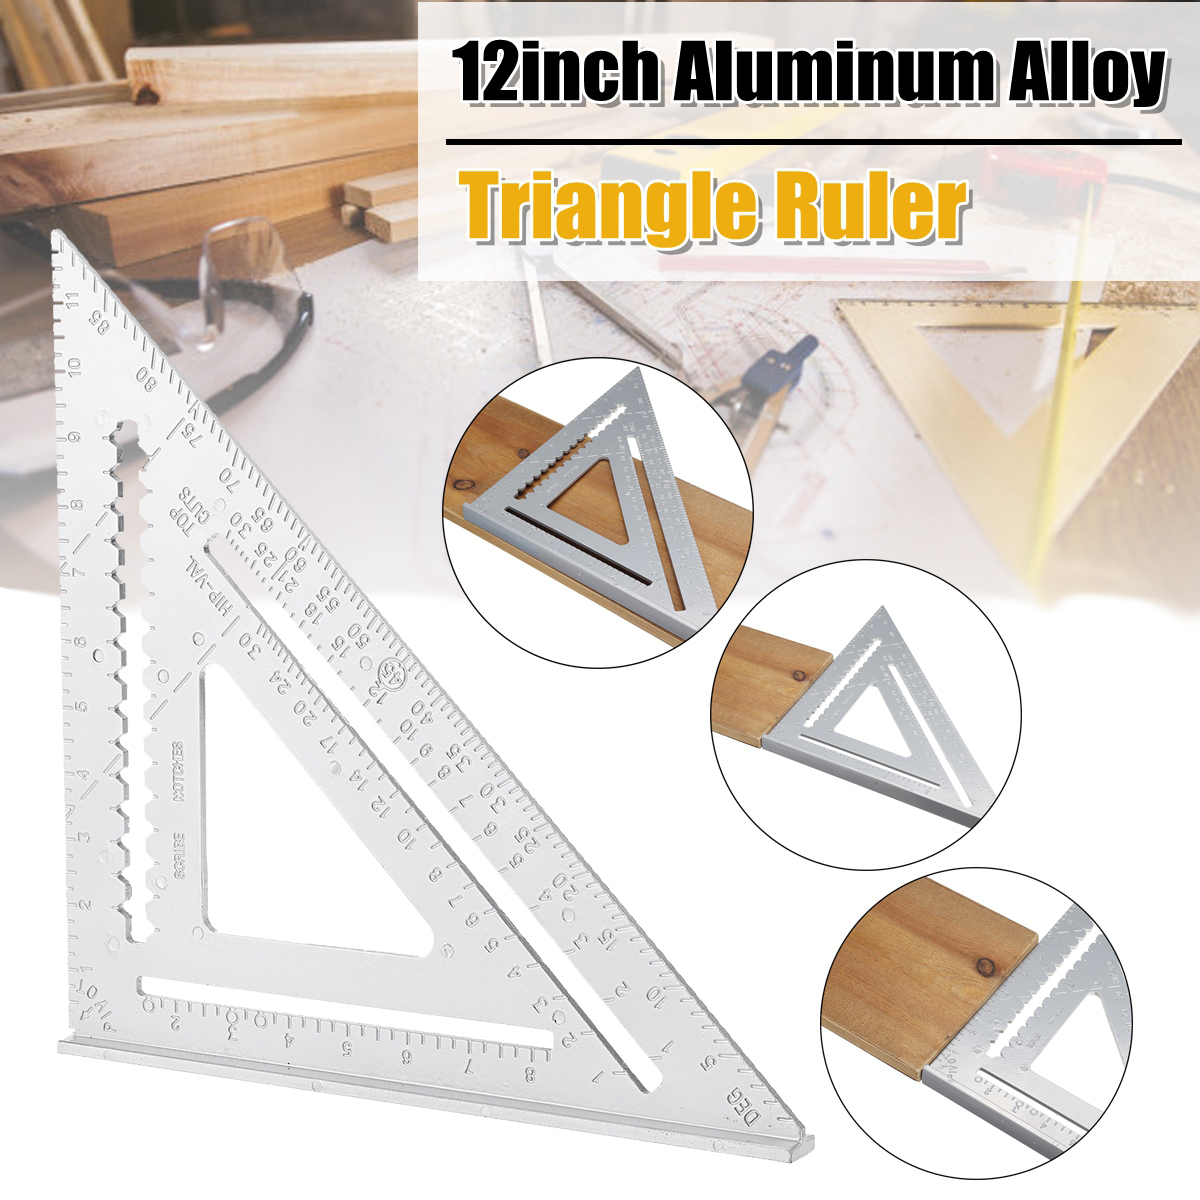 Aluminum-Alloy-Angle-Square-Triangle-Ruler-Roofing-Carpenter-Woodworking-Tool-1779182-1